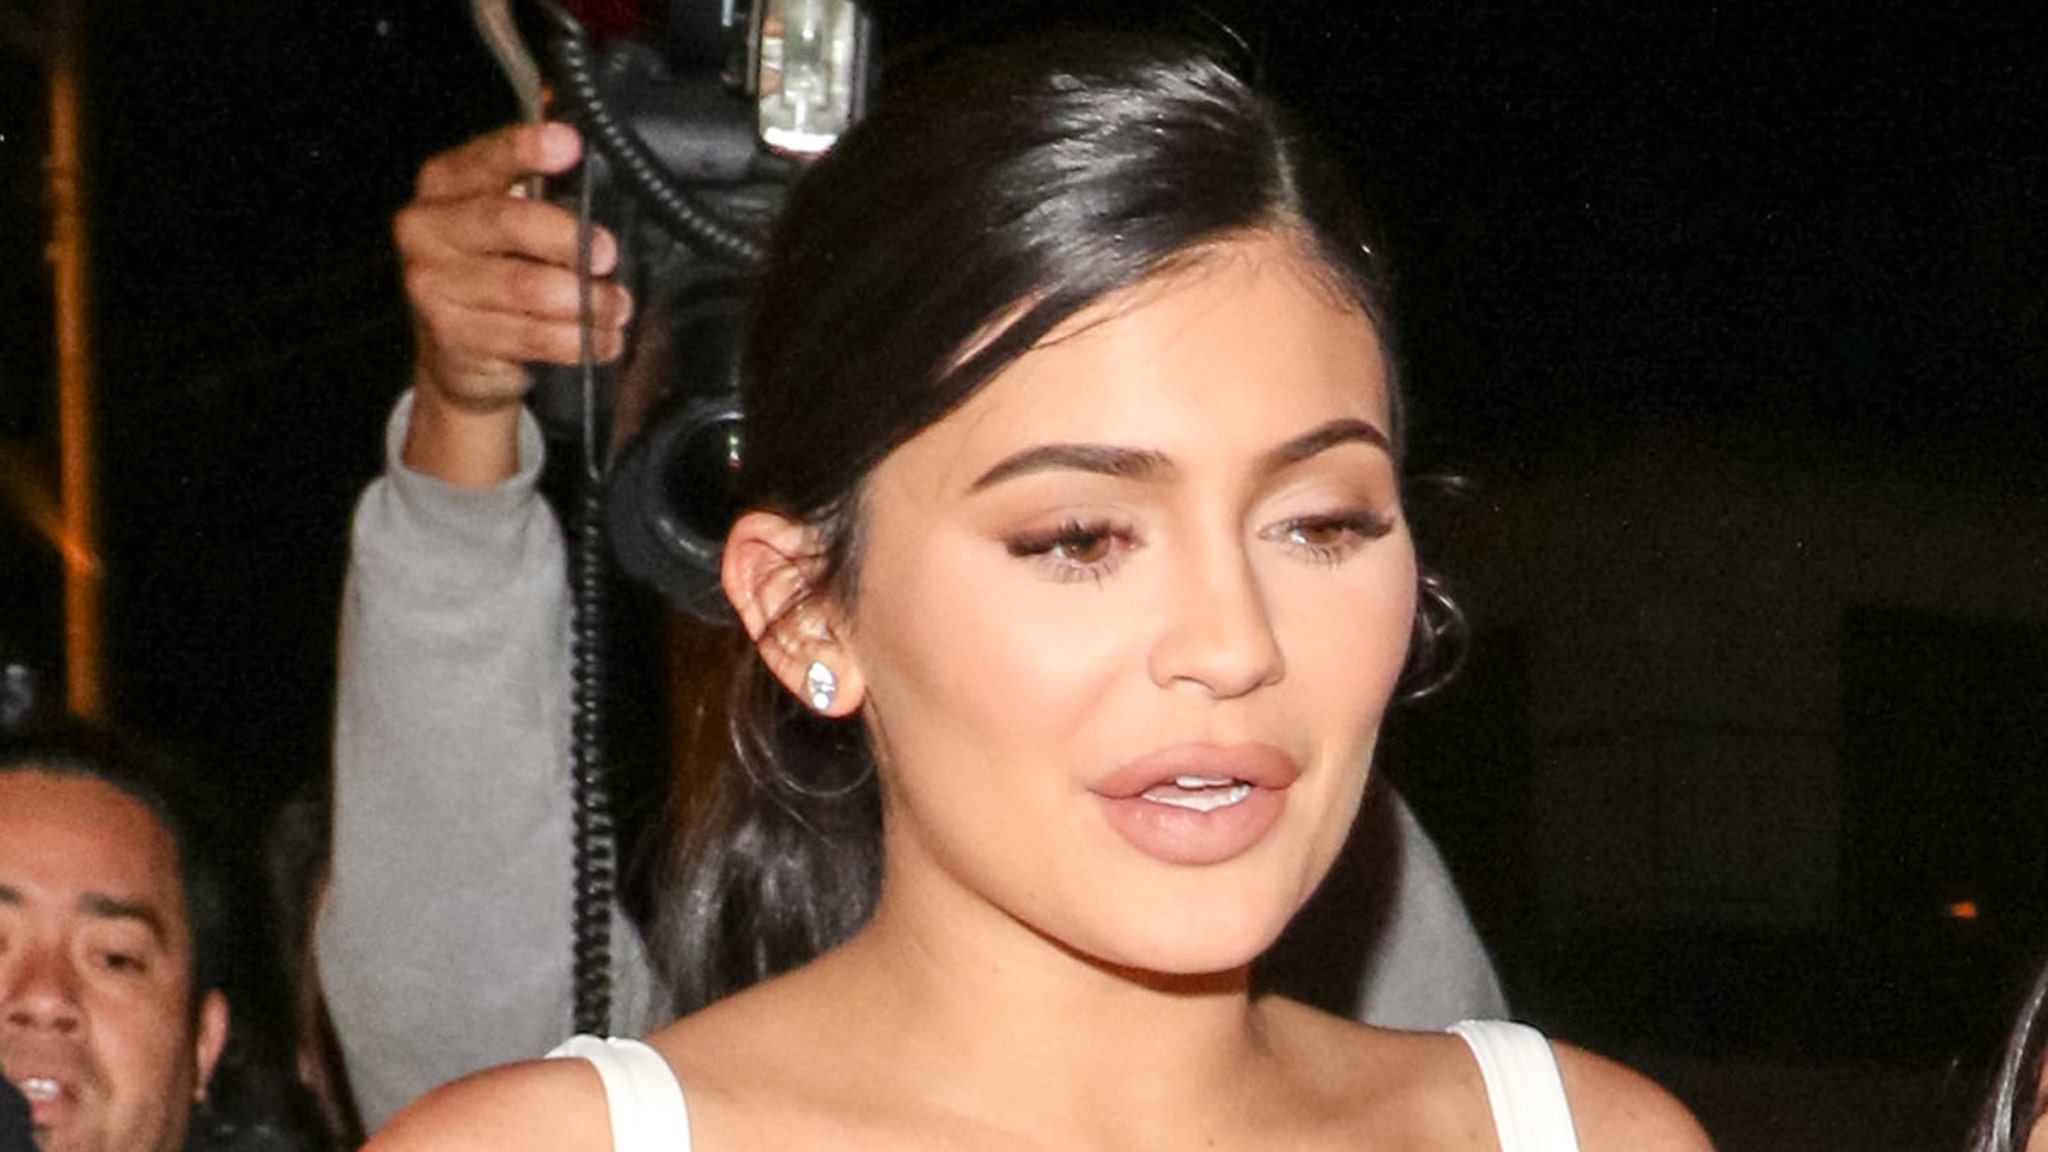 Kylie Jenner gets protection against alleged burglar in the area